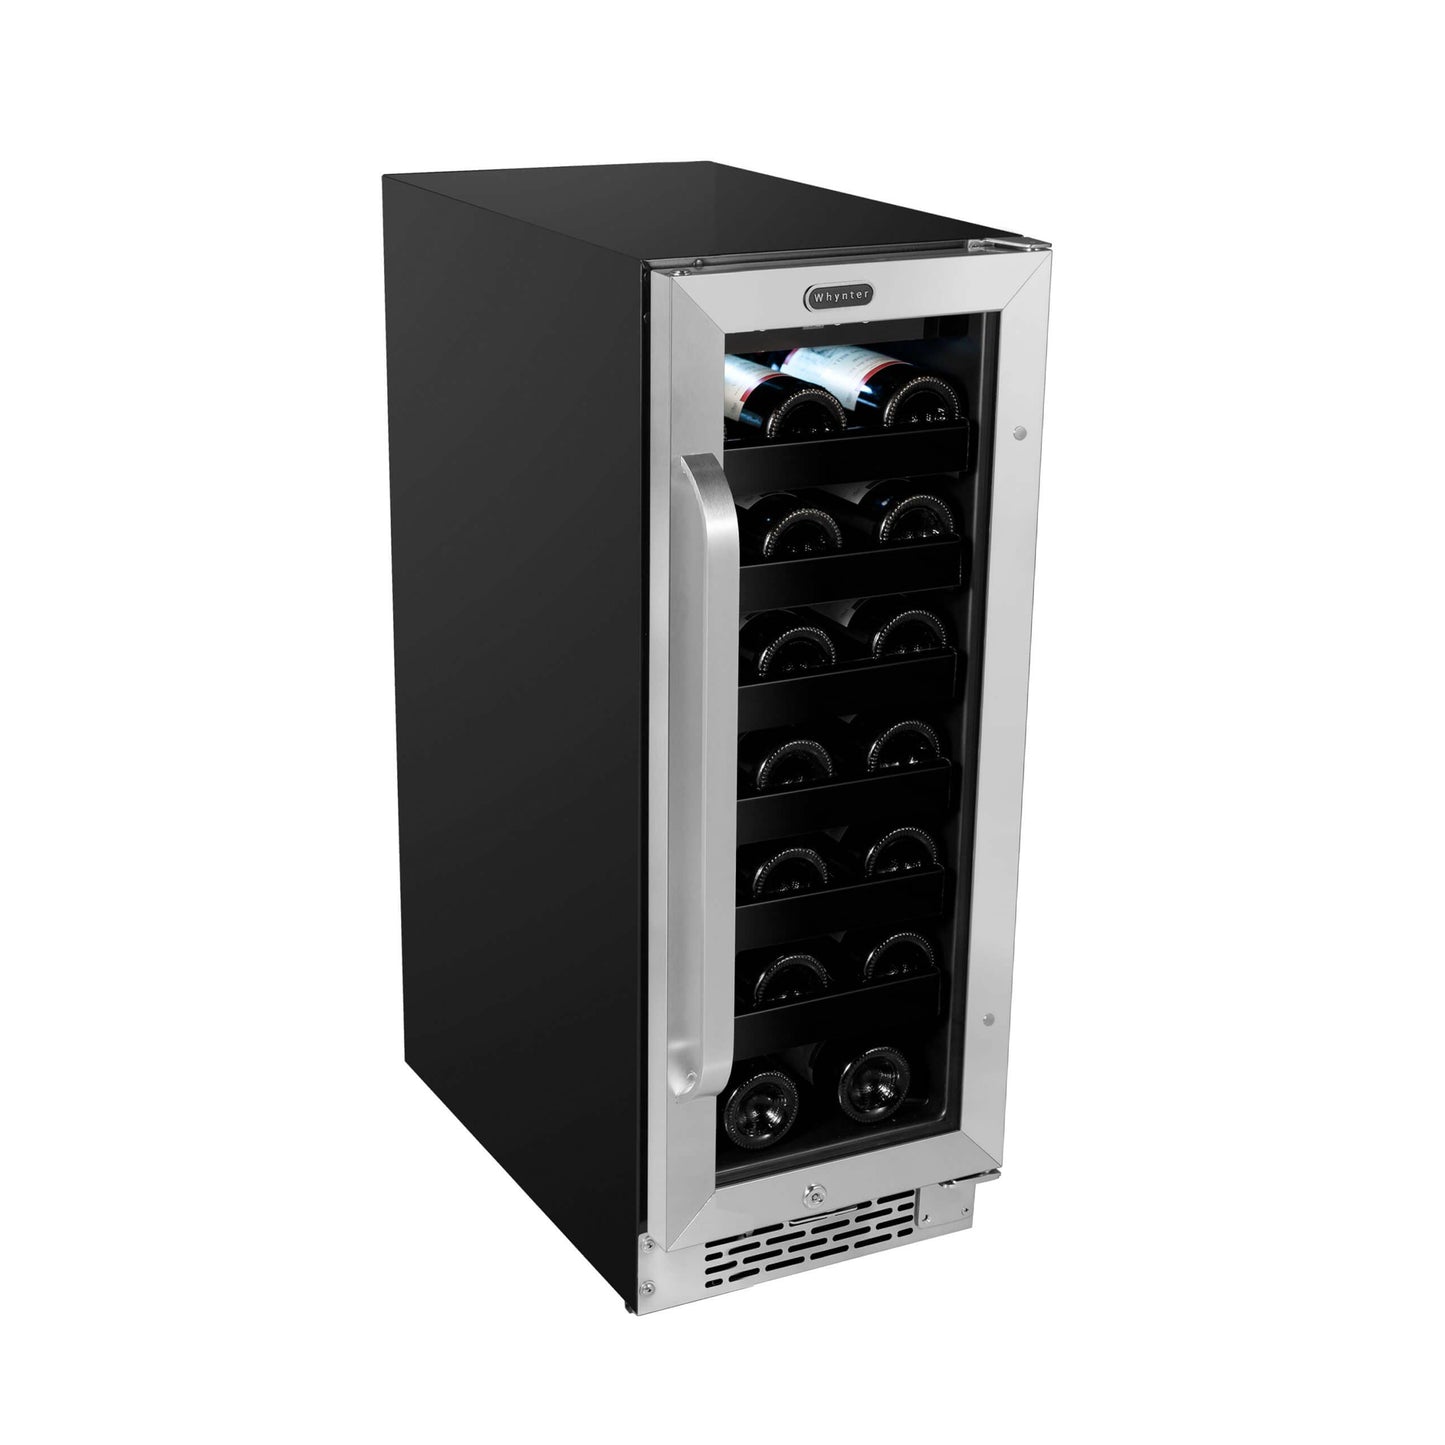 Whynter Wine Refrigerator Whynter BWR-208SB 12 inch Built-In 20 Bottle Undercounter Stainless Steel Wine Refrigerator with Reversible Door, Digital Control, Lock and Carbon Filter